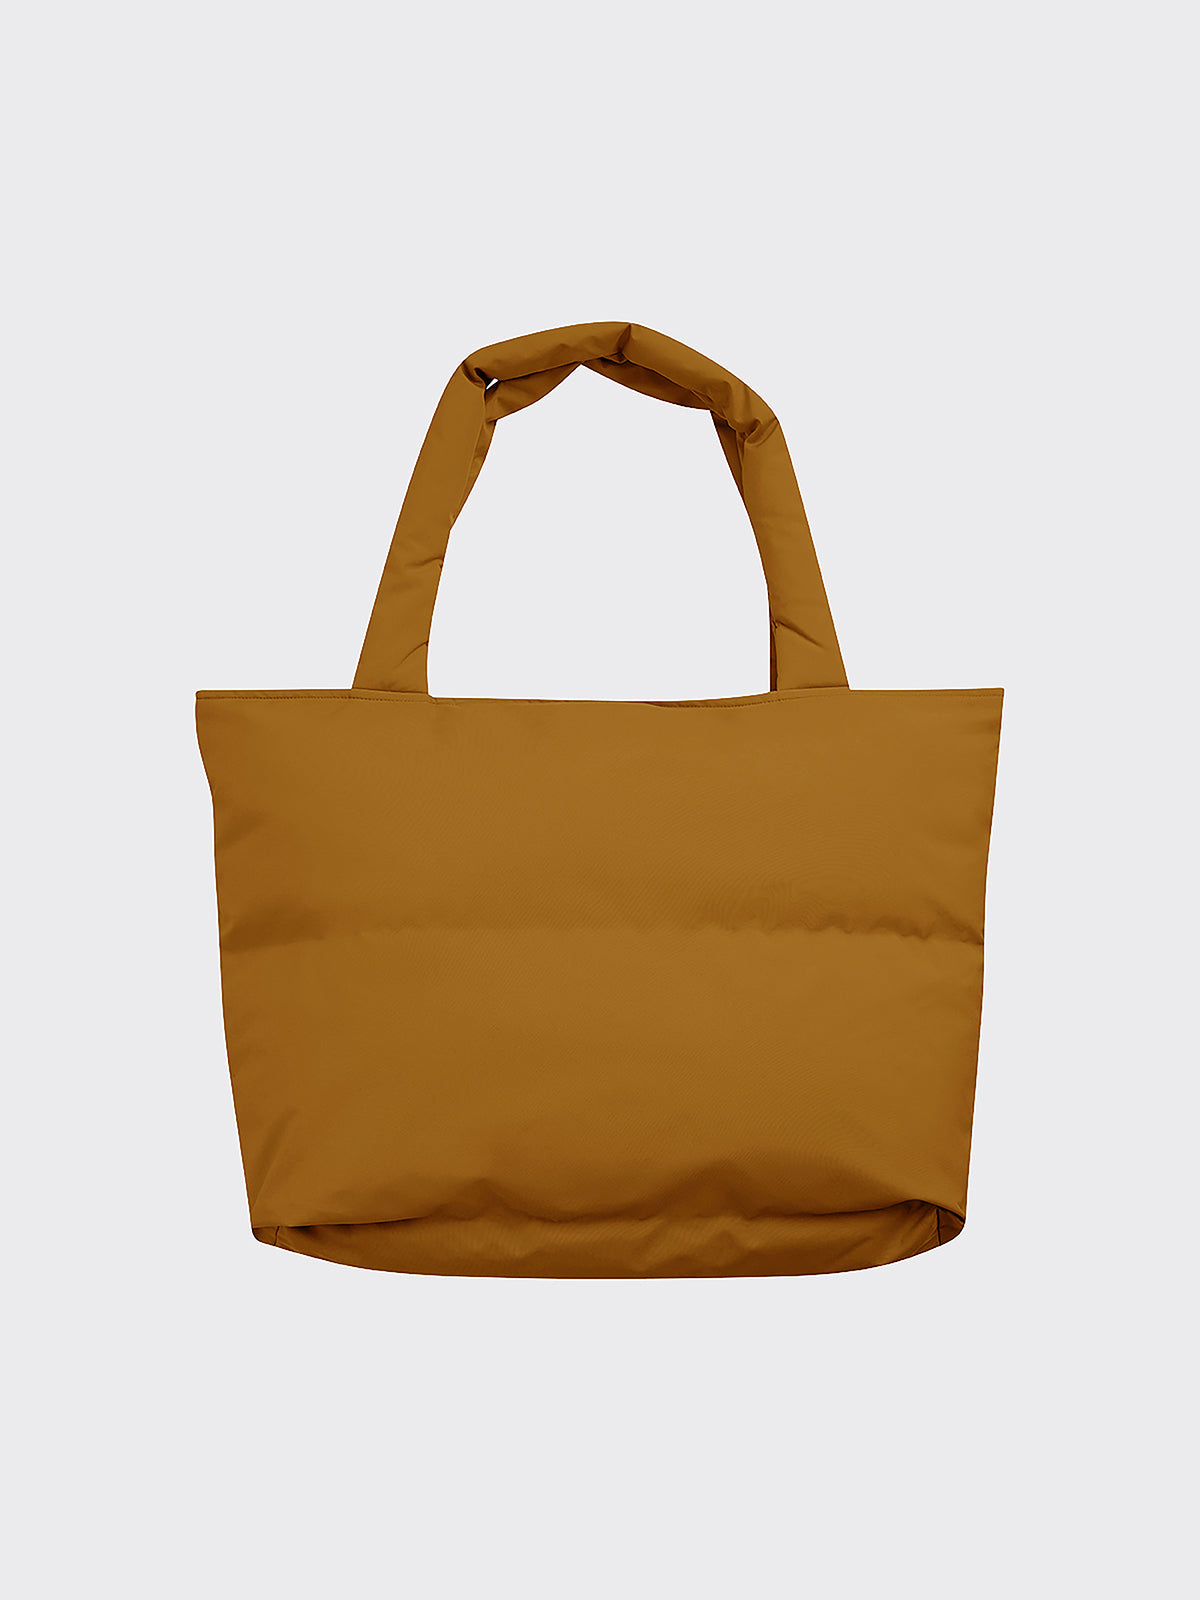 Pillow bag from Blæst in the color Rubber